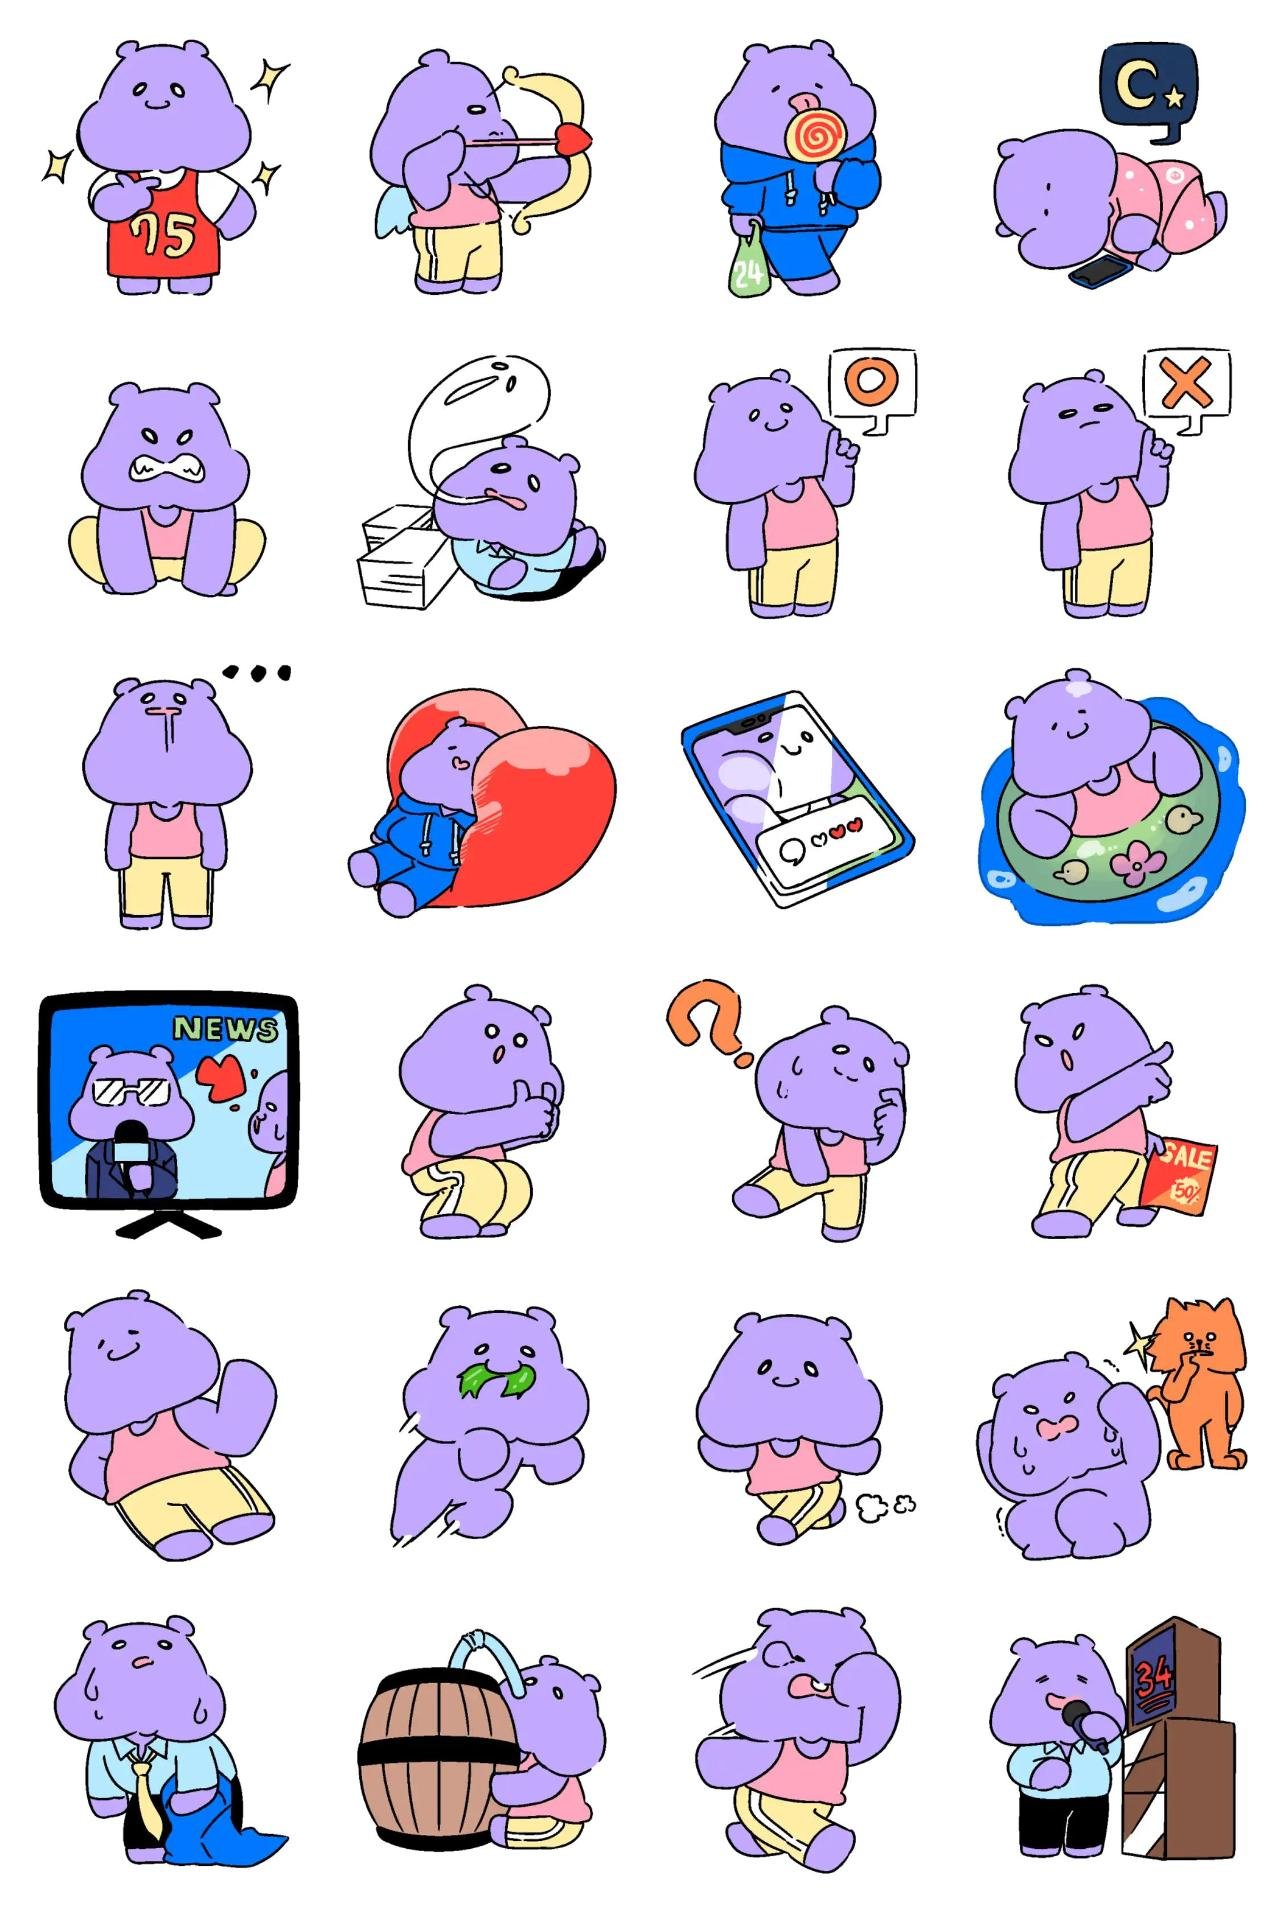 Hippo HEEEPPO! Animation/Cartoon,Animals sticker pack for Whatsapp, Telegram, Signal, and others chatting and message apps